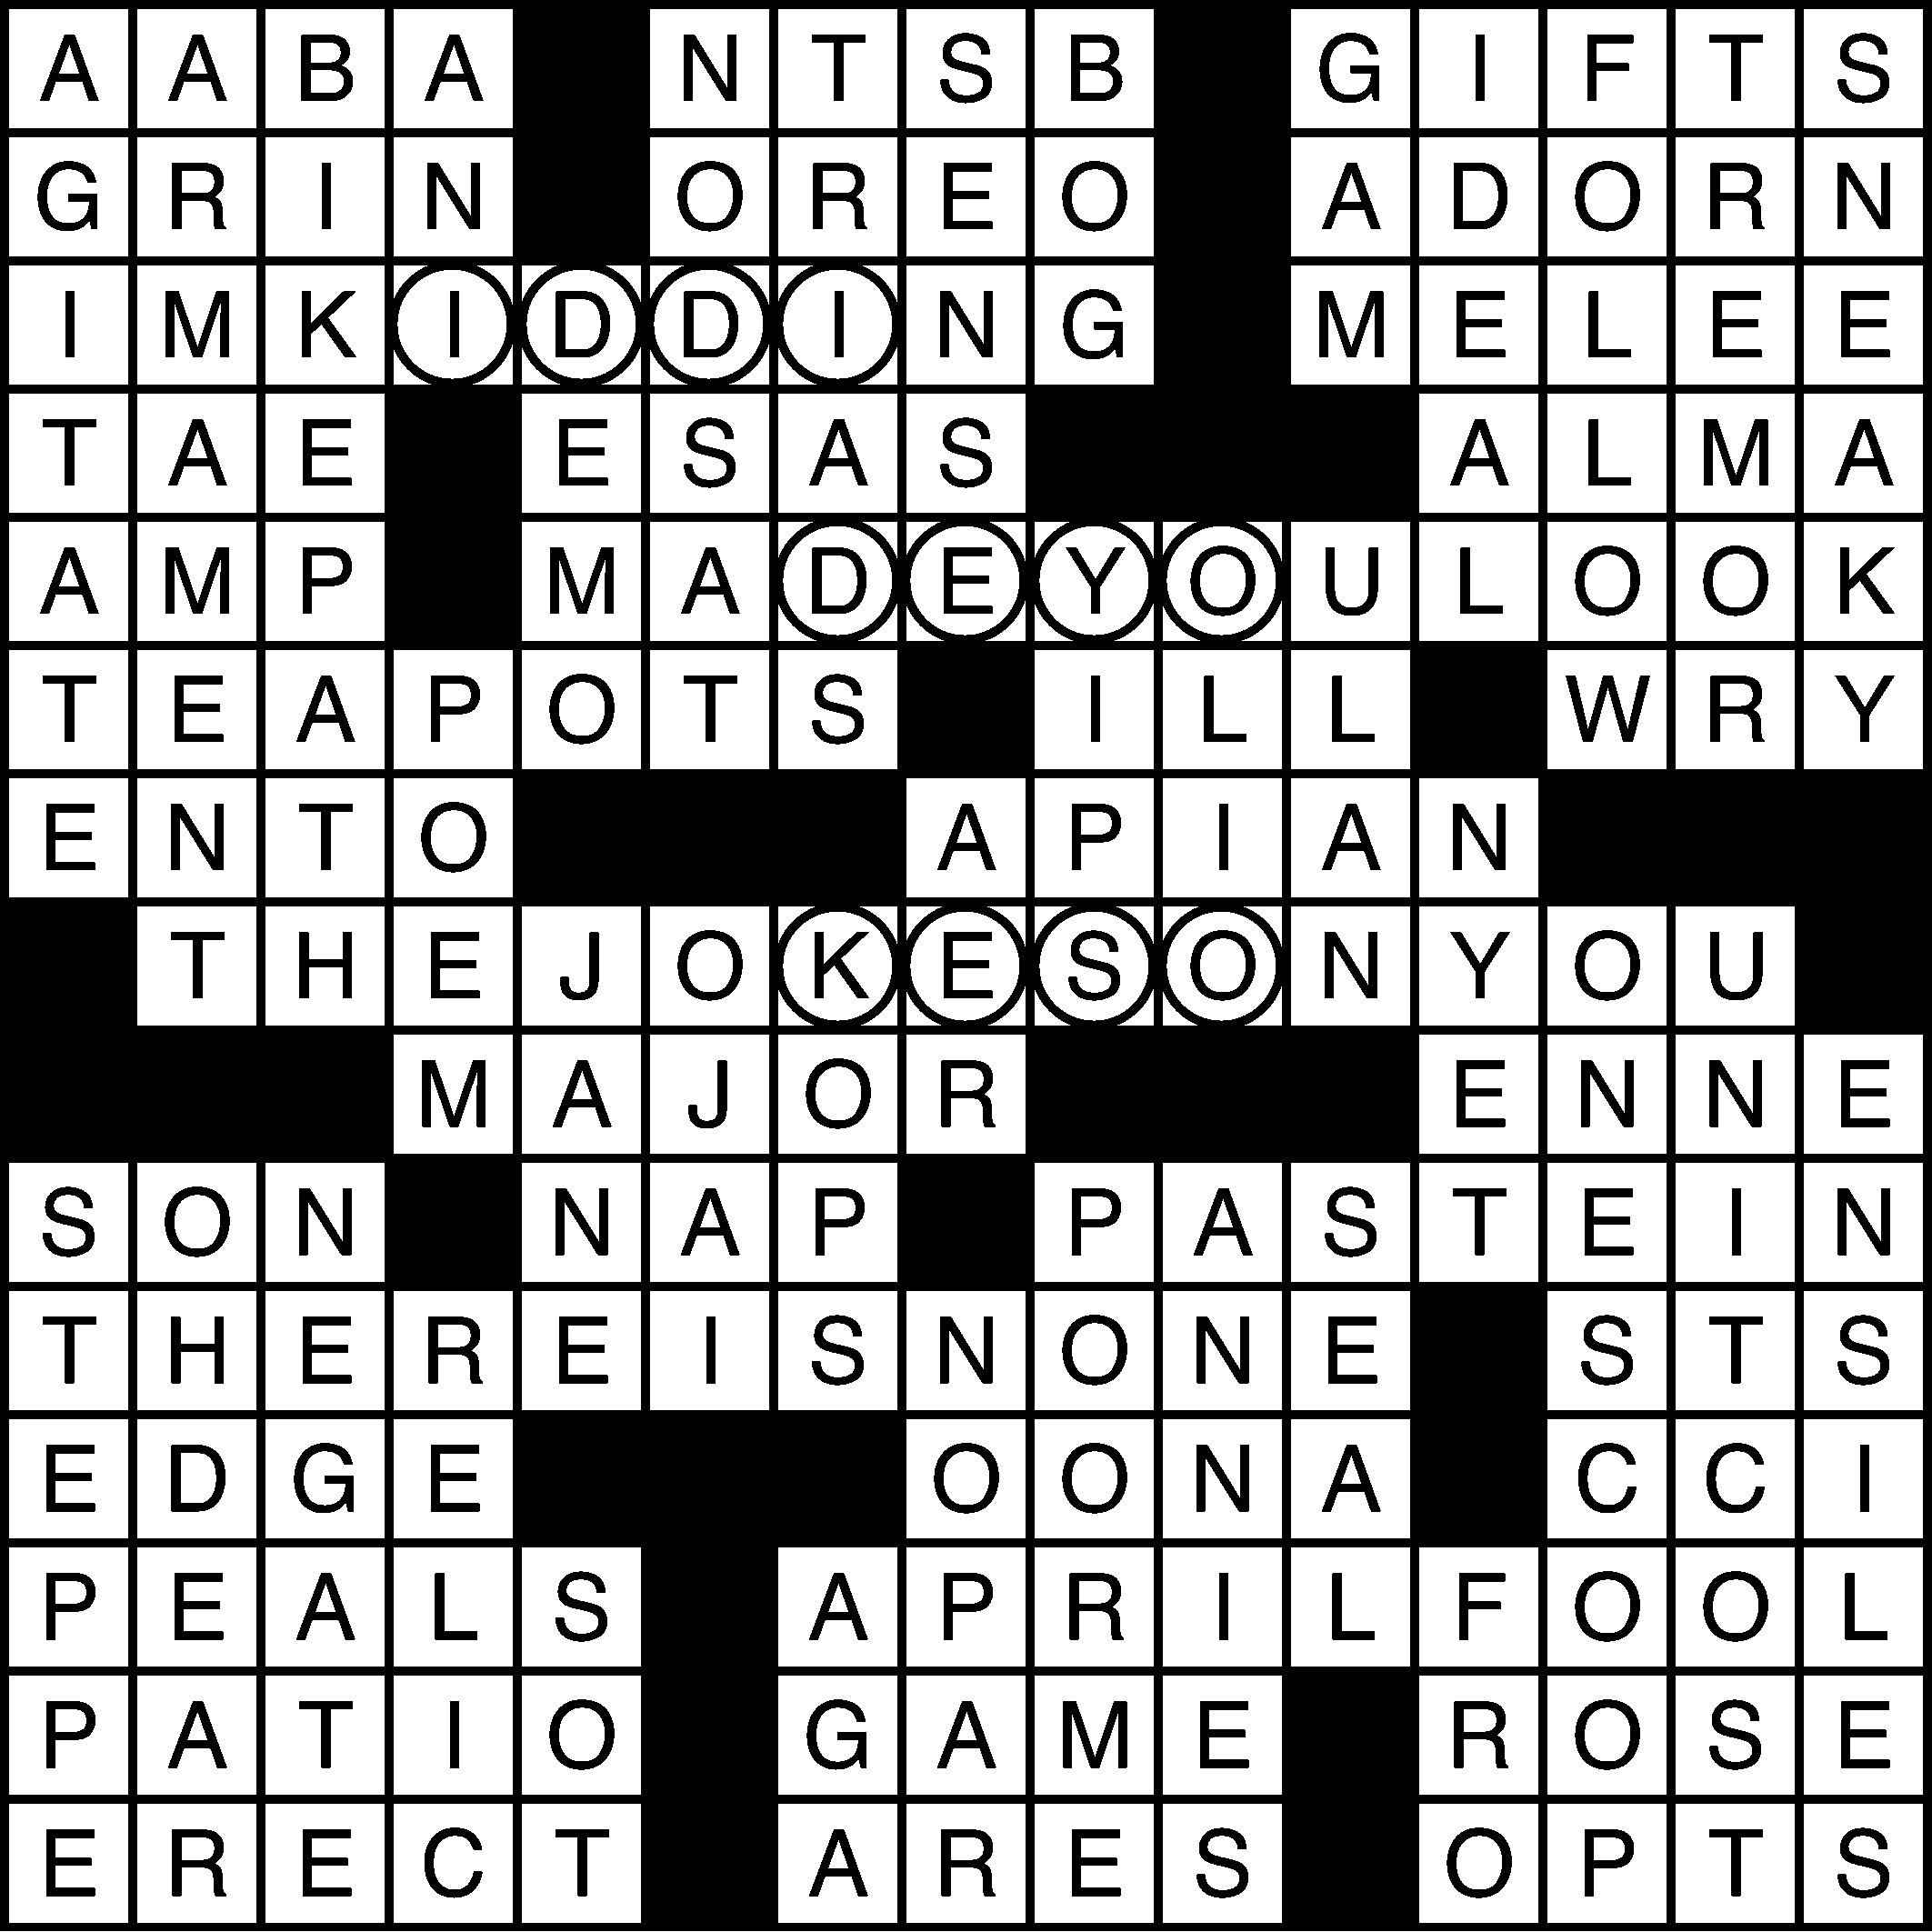 First crossword clue 5 letters